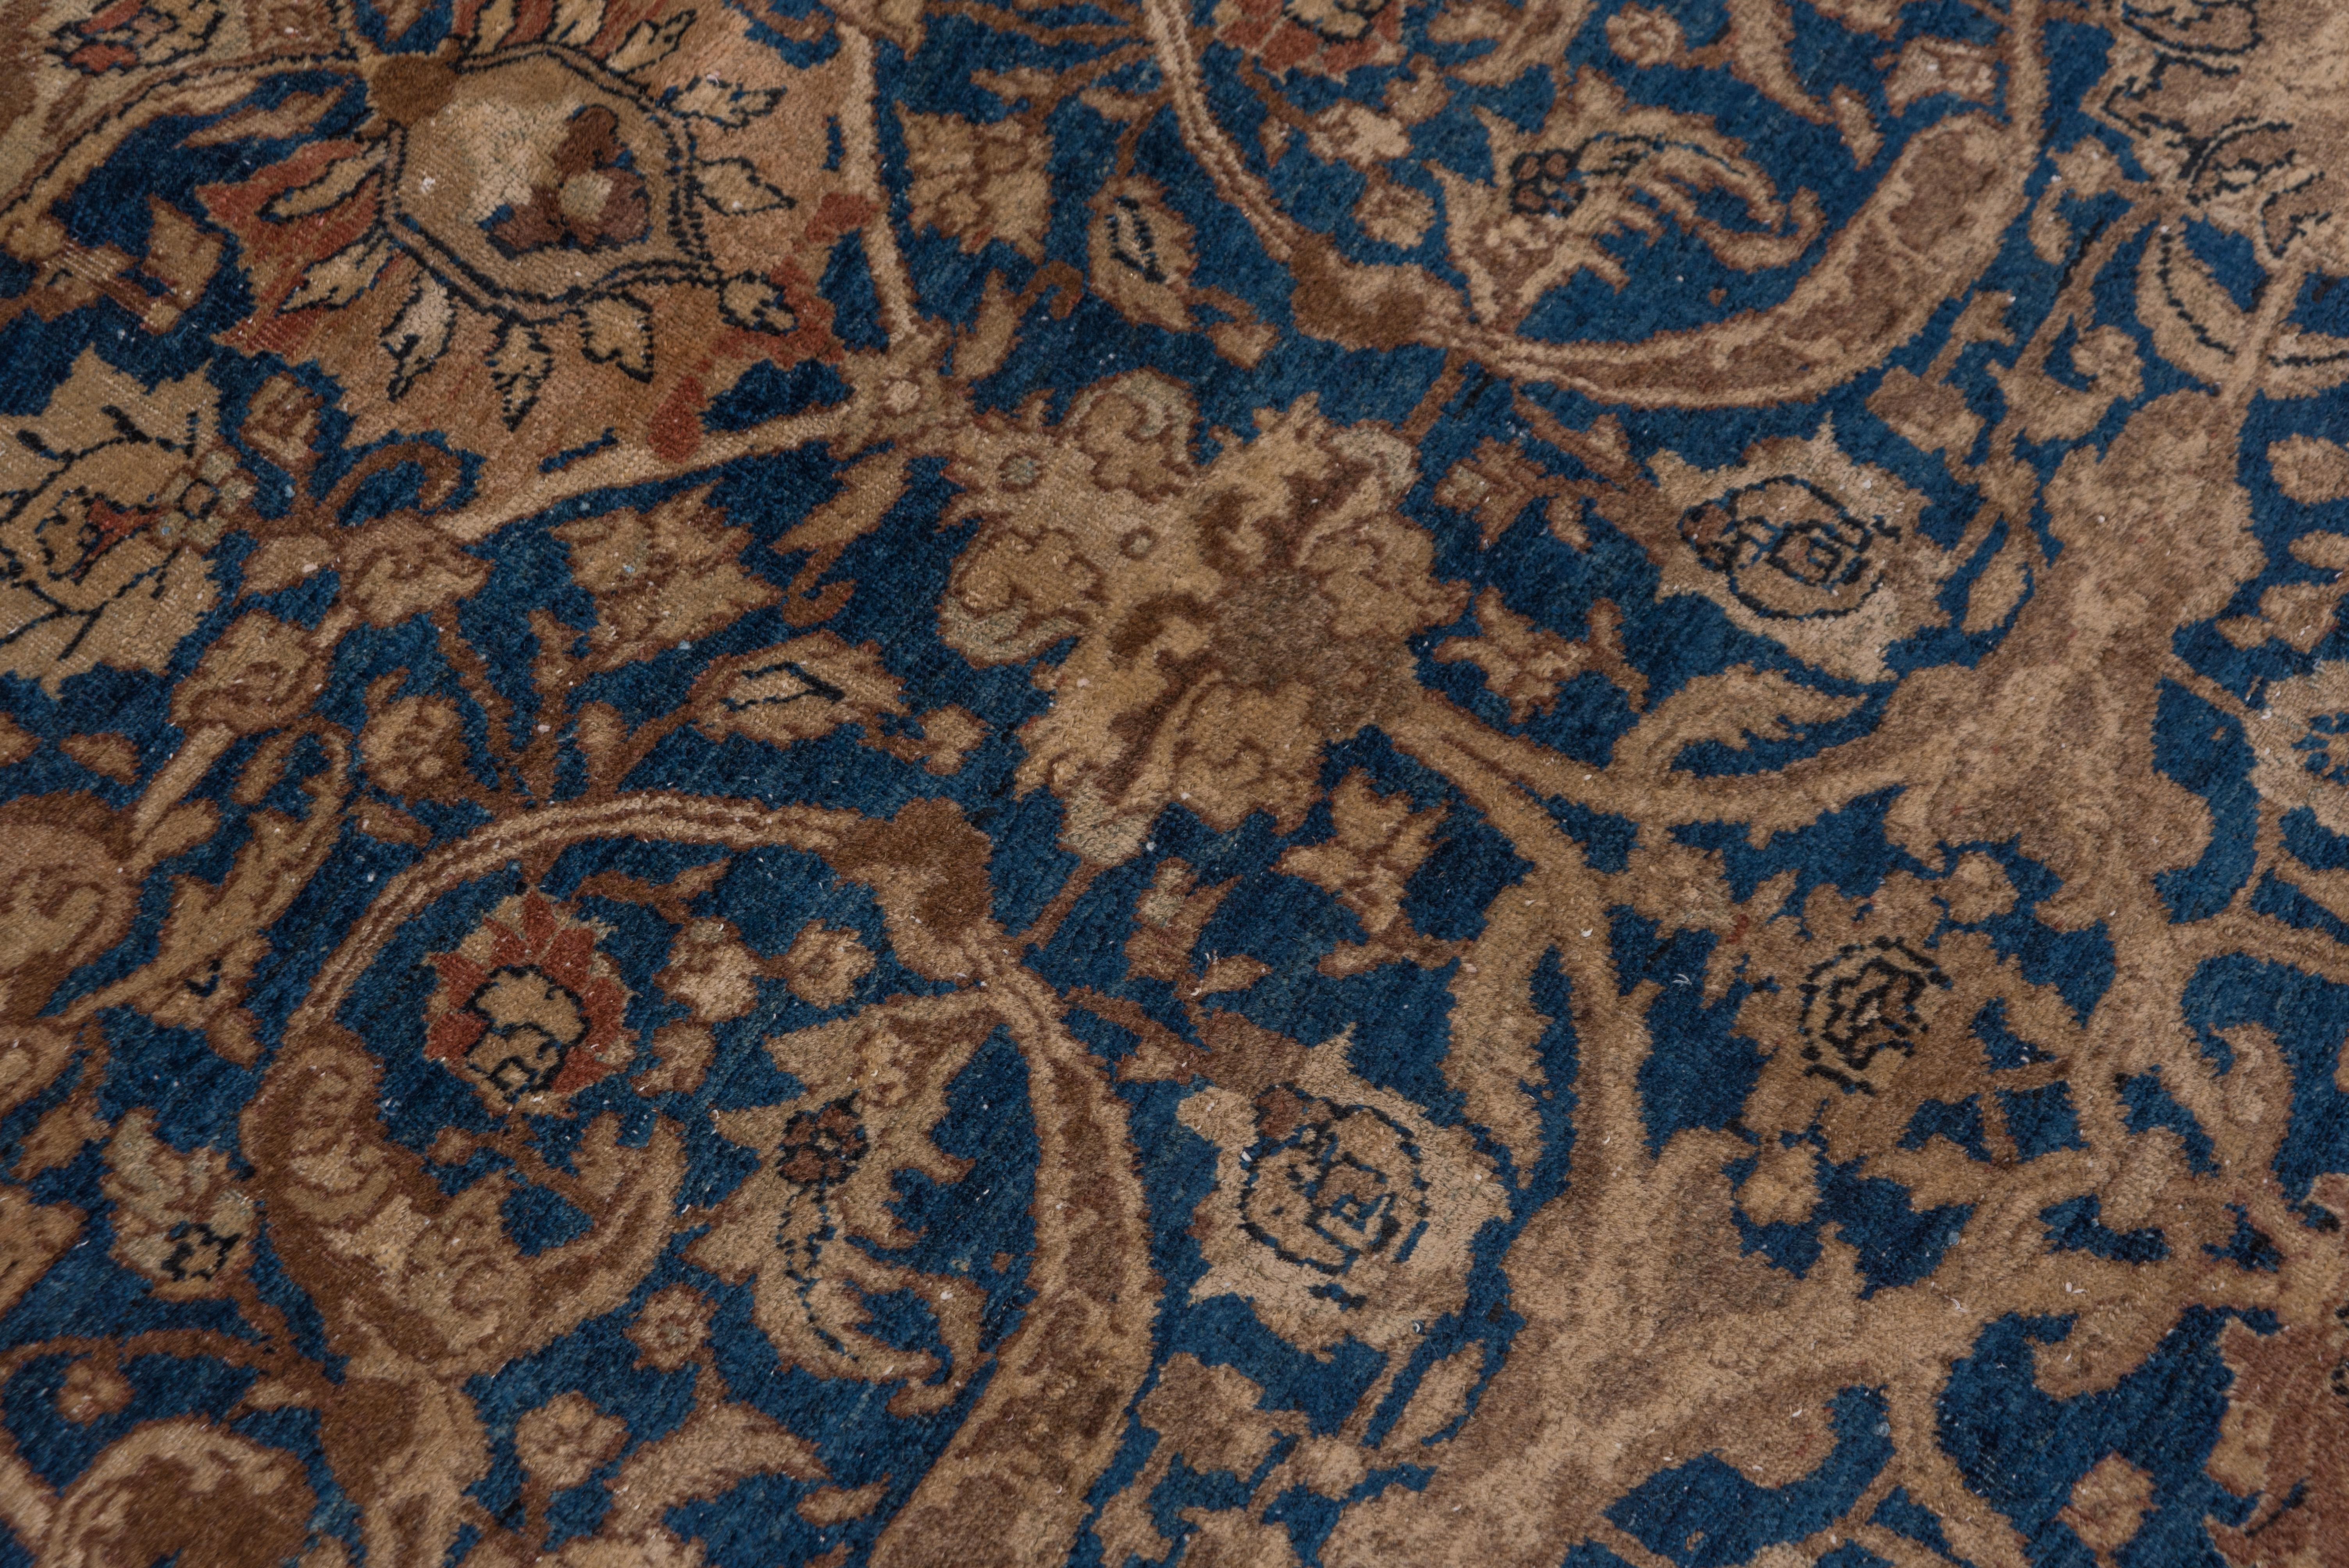 Hand-Knotted Antique Persian Tabriz Rug, Blue & Tan Field, Curvilinear Medallion, circa 1920s